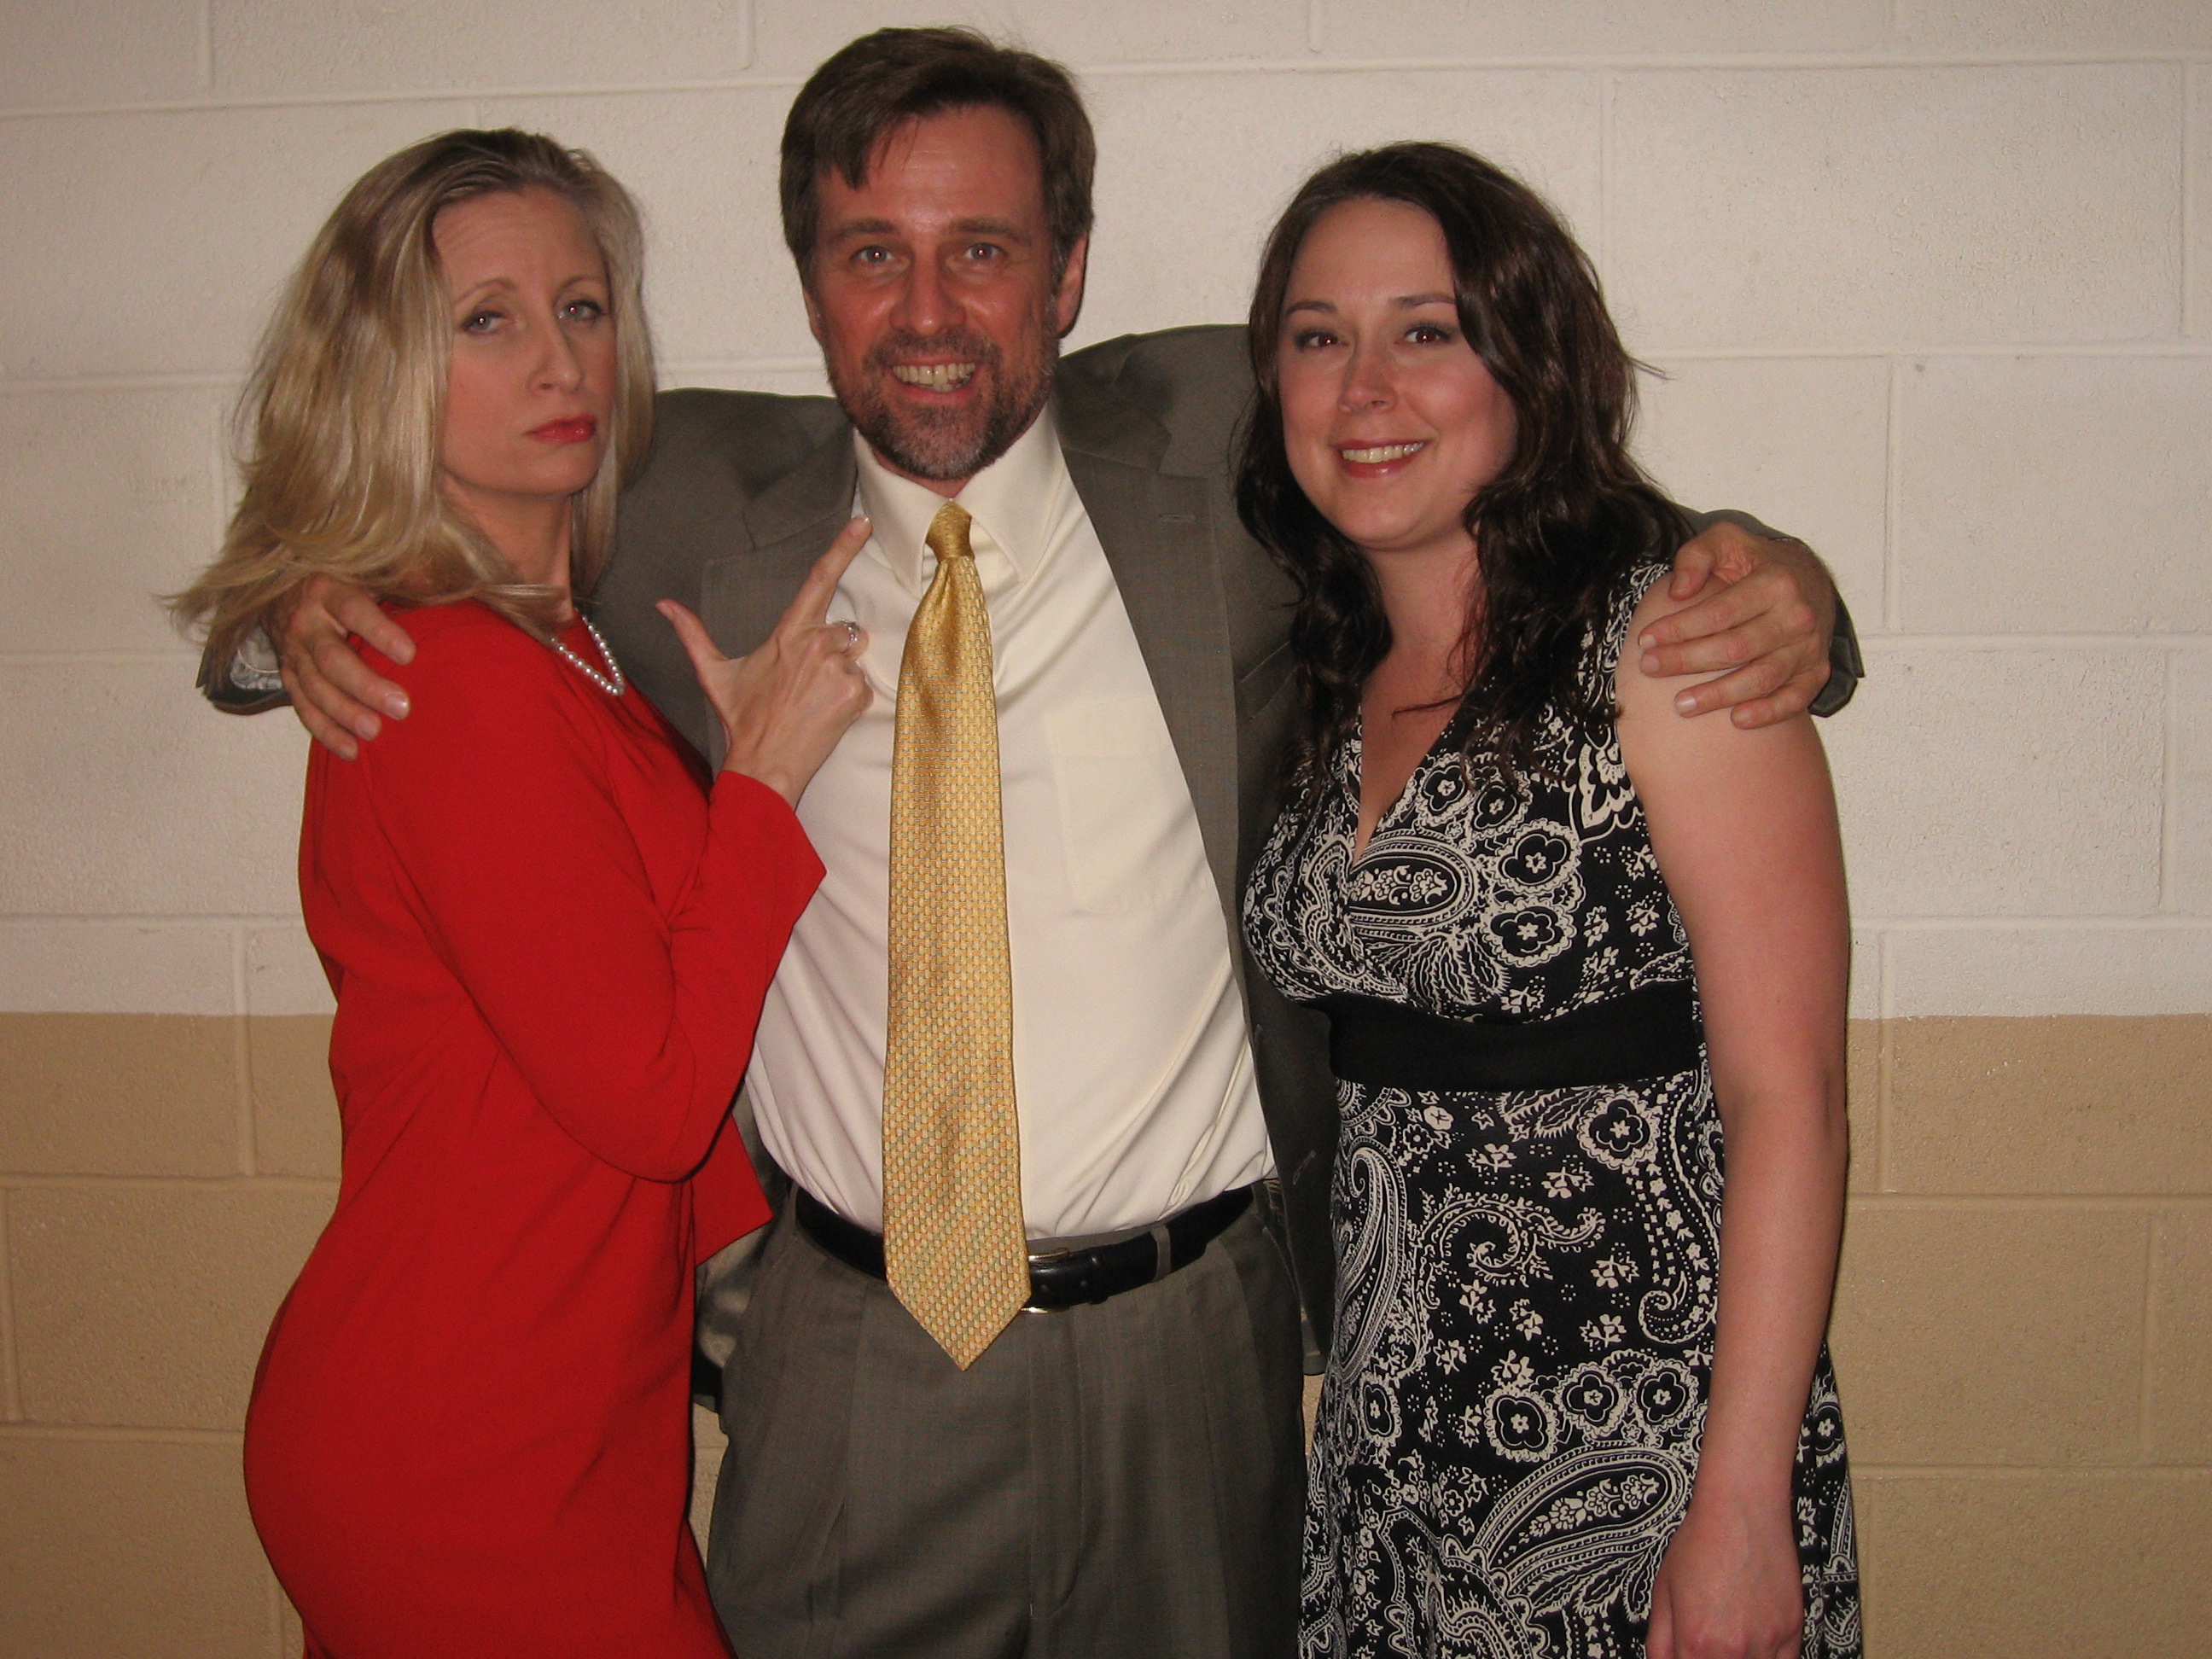 Pamela Hardy, Scott and Angela Umfleet on the set of the M2 Pictures/Investigation Discovery Channel series Happily Never After May 2013